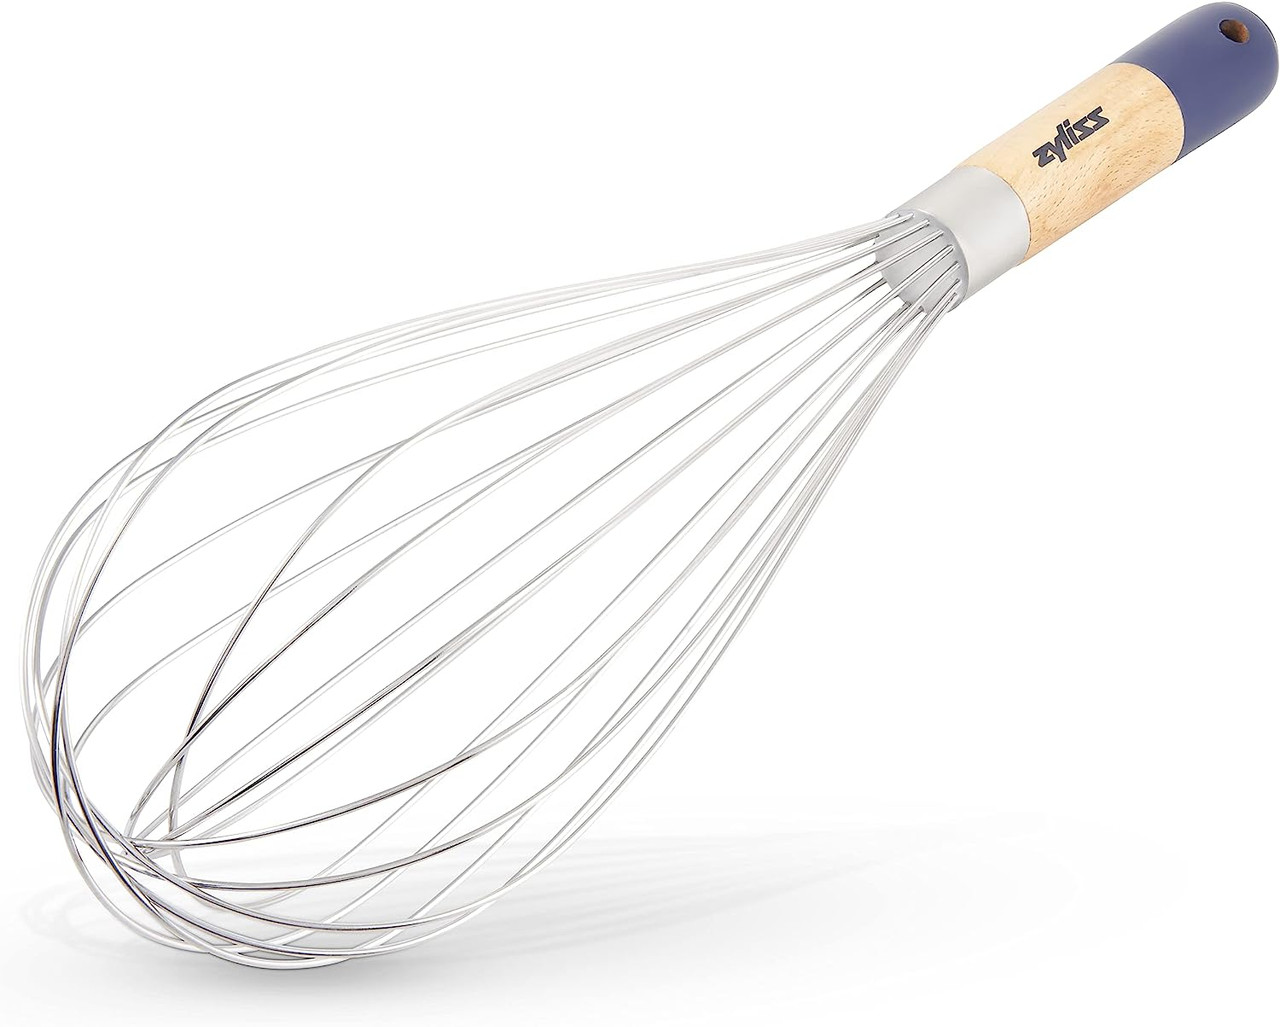 Zyliss Large Silicone Balloon Whisk